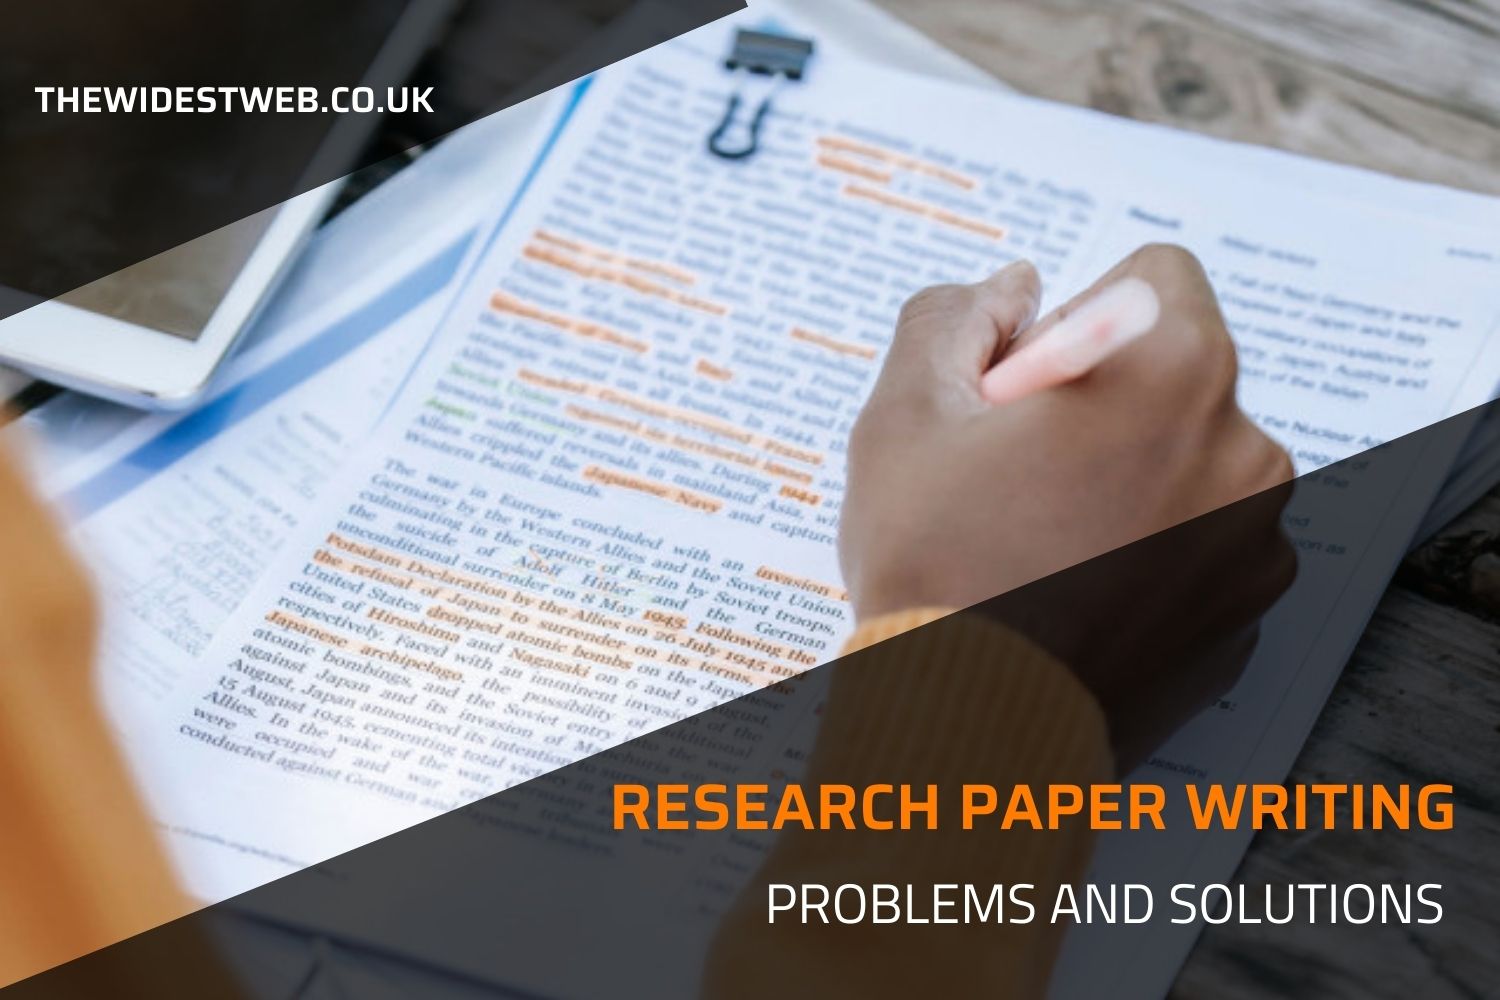 Research Paper Writing: 7 Common Problems and Their Solutions